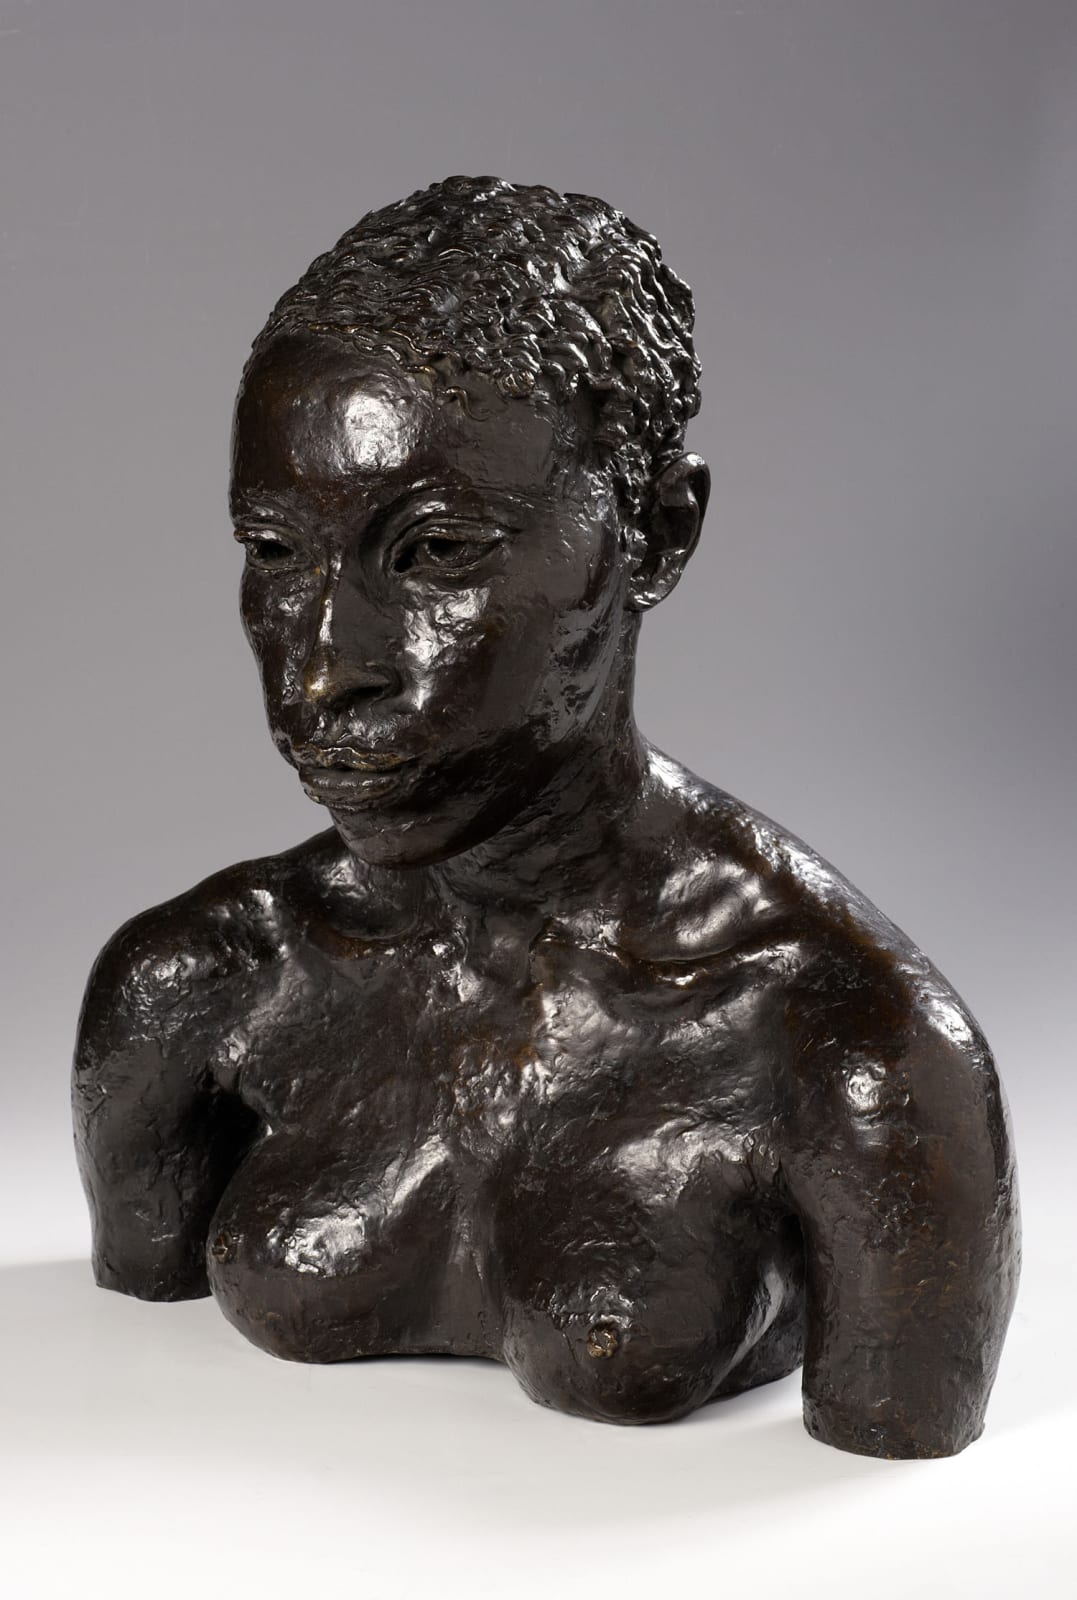 Jacob Epstein (1880-1959) Lydia 1931 Bronze 48 x 40 x 20 cm Ben Uri Collection © Jacob Epstein estate To see and discover more about this artist click here